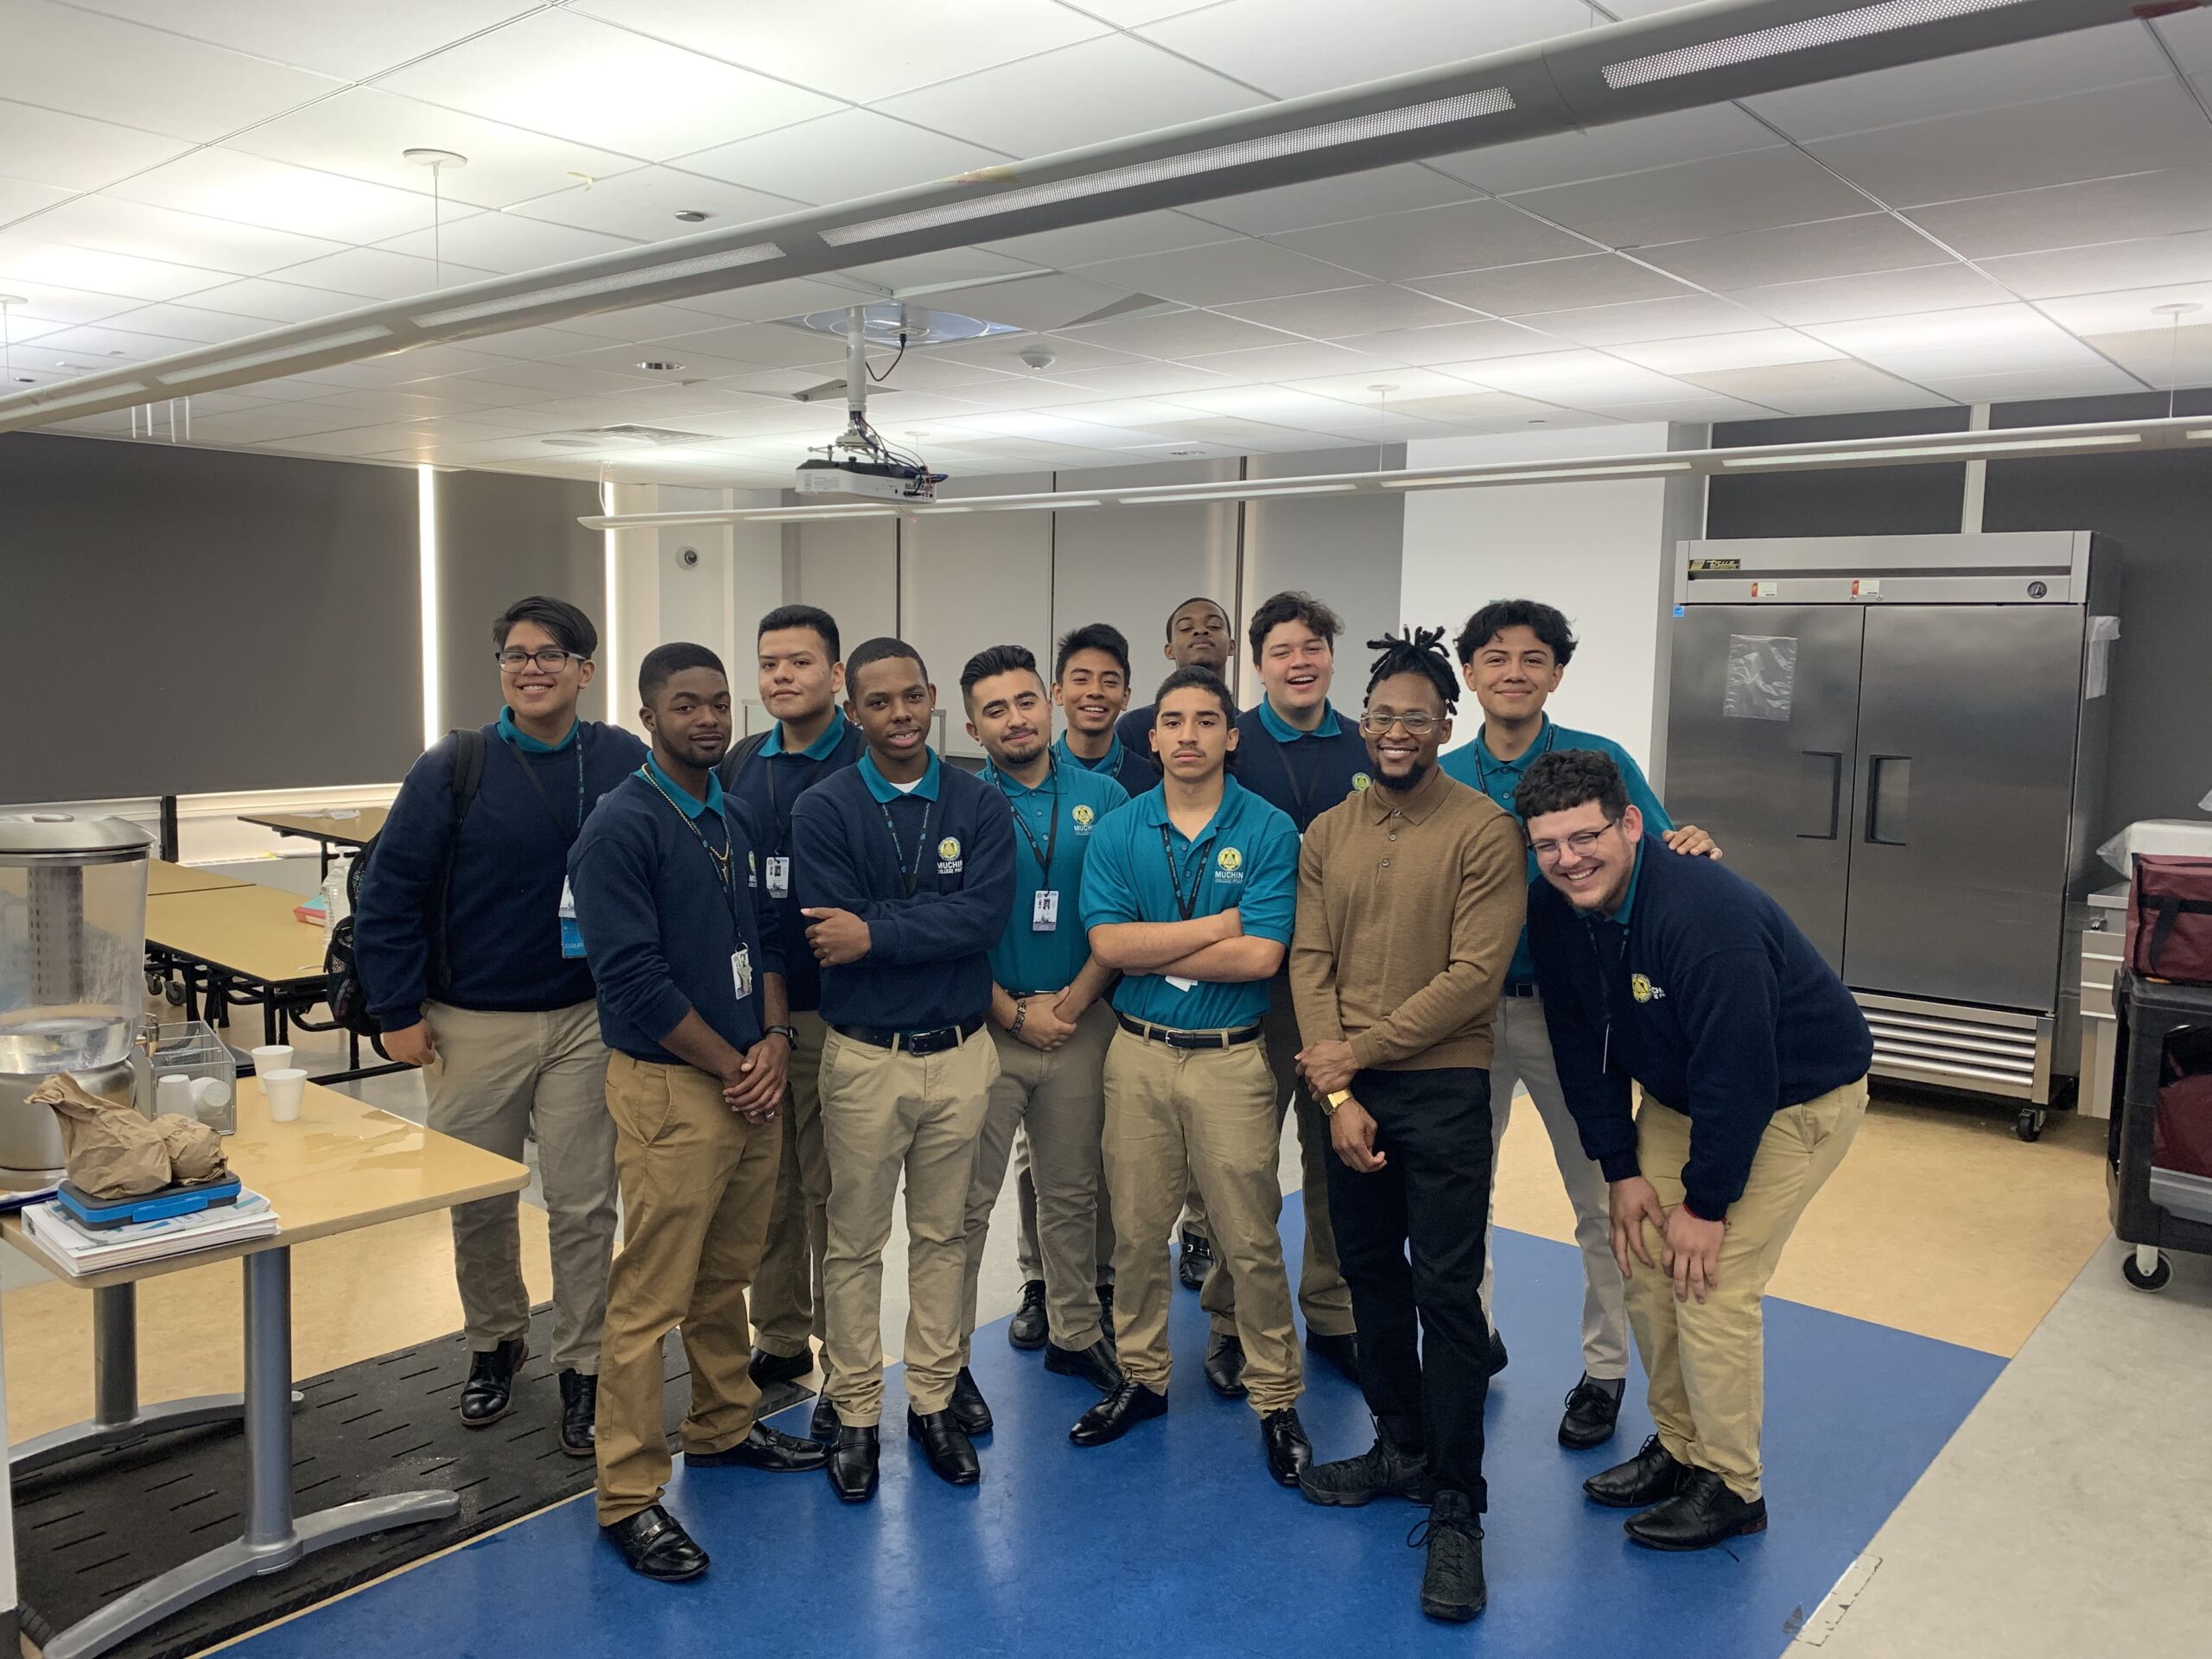 Emmanuel poses with his entire advisory. Emmanuel is wearing a beige sweater and has his hair wrapped up in a bun. The students are wearing navy blue sweaters and khaki pants. Some students are wearing teal button up school shirt.